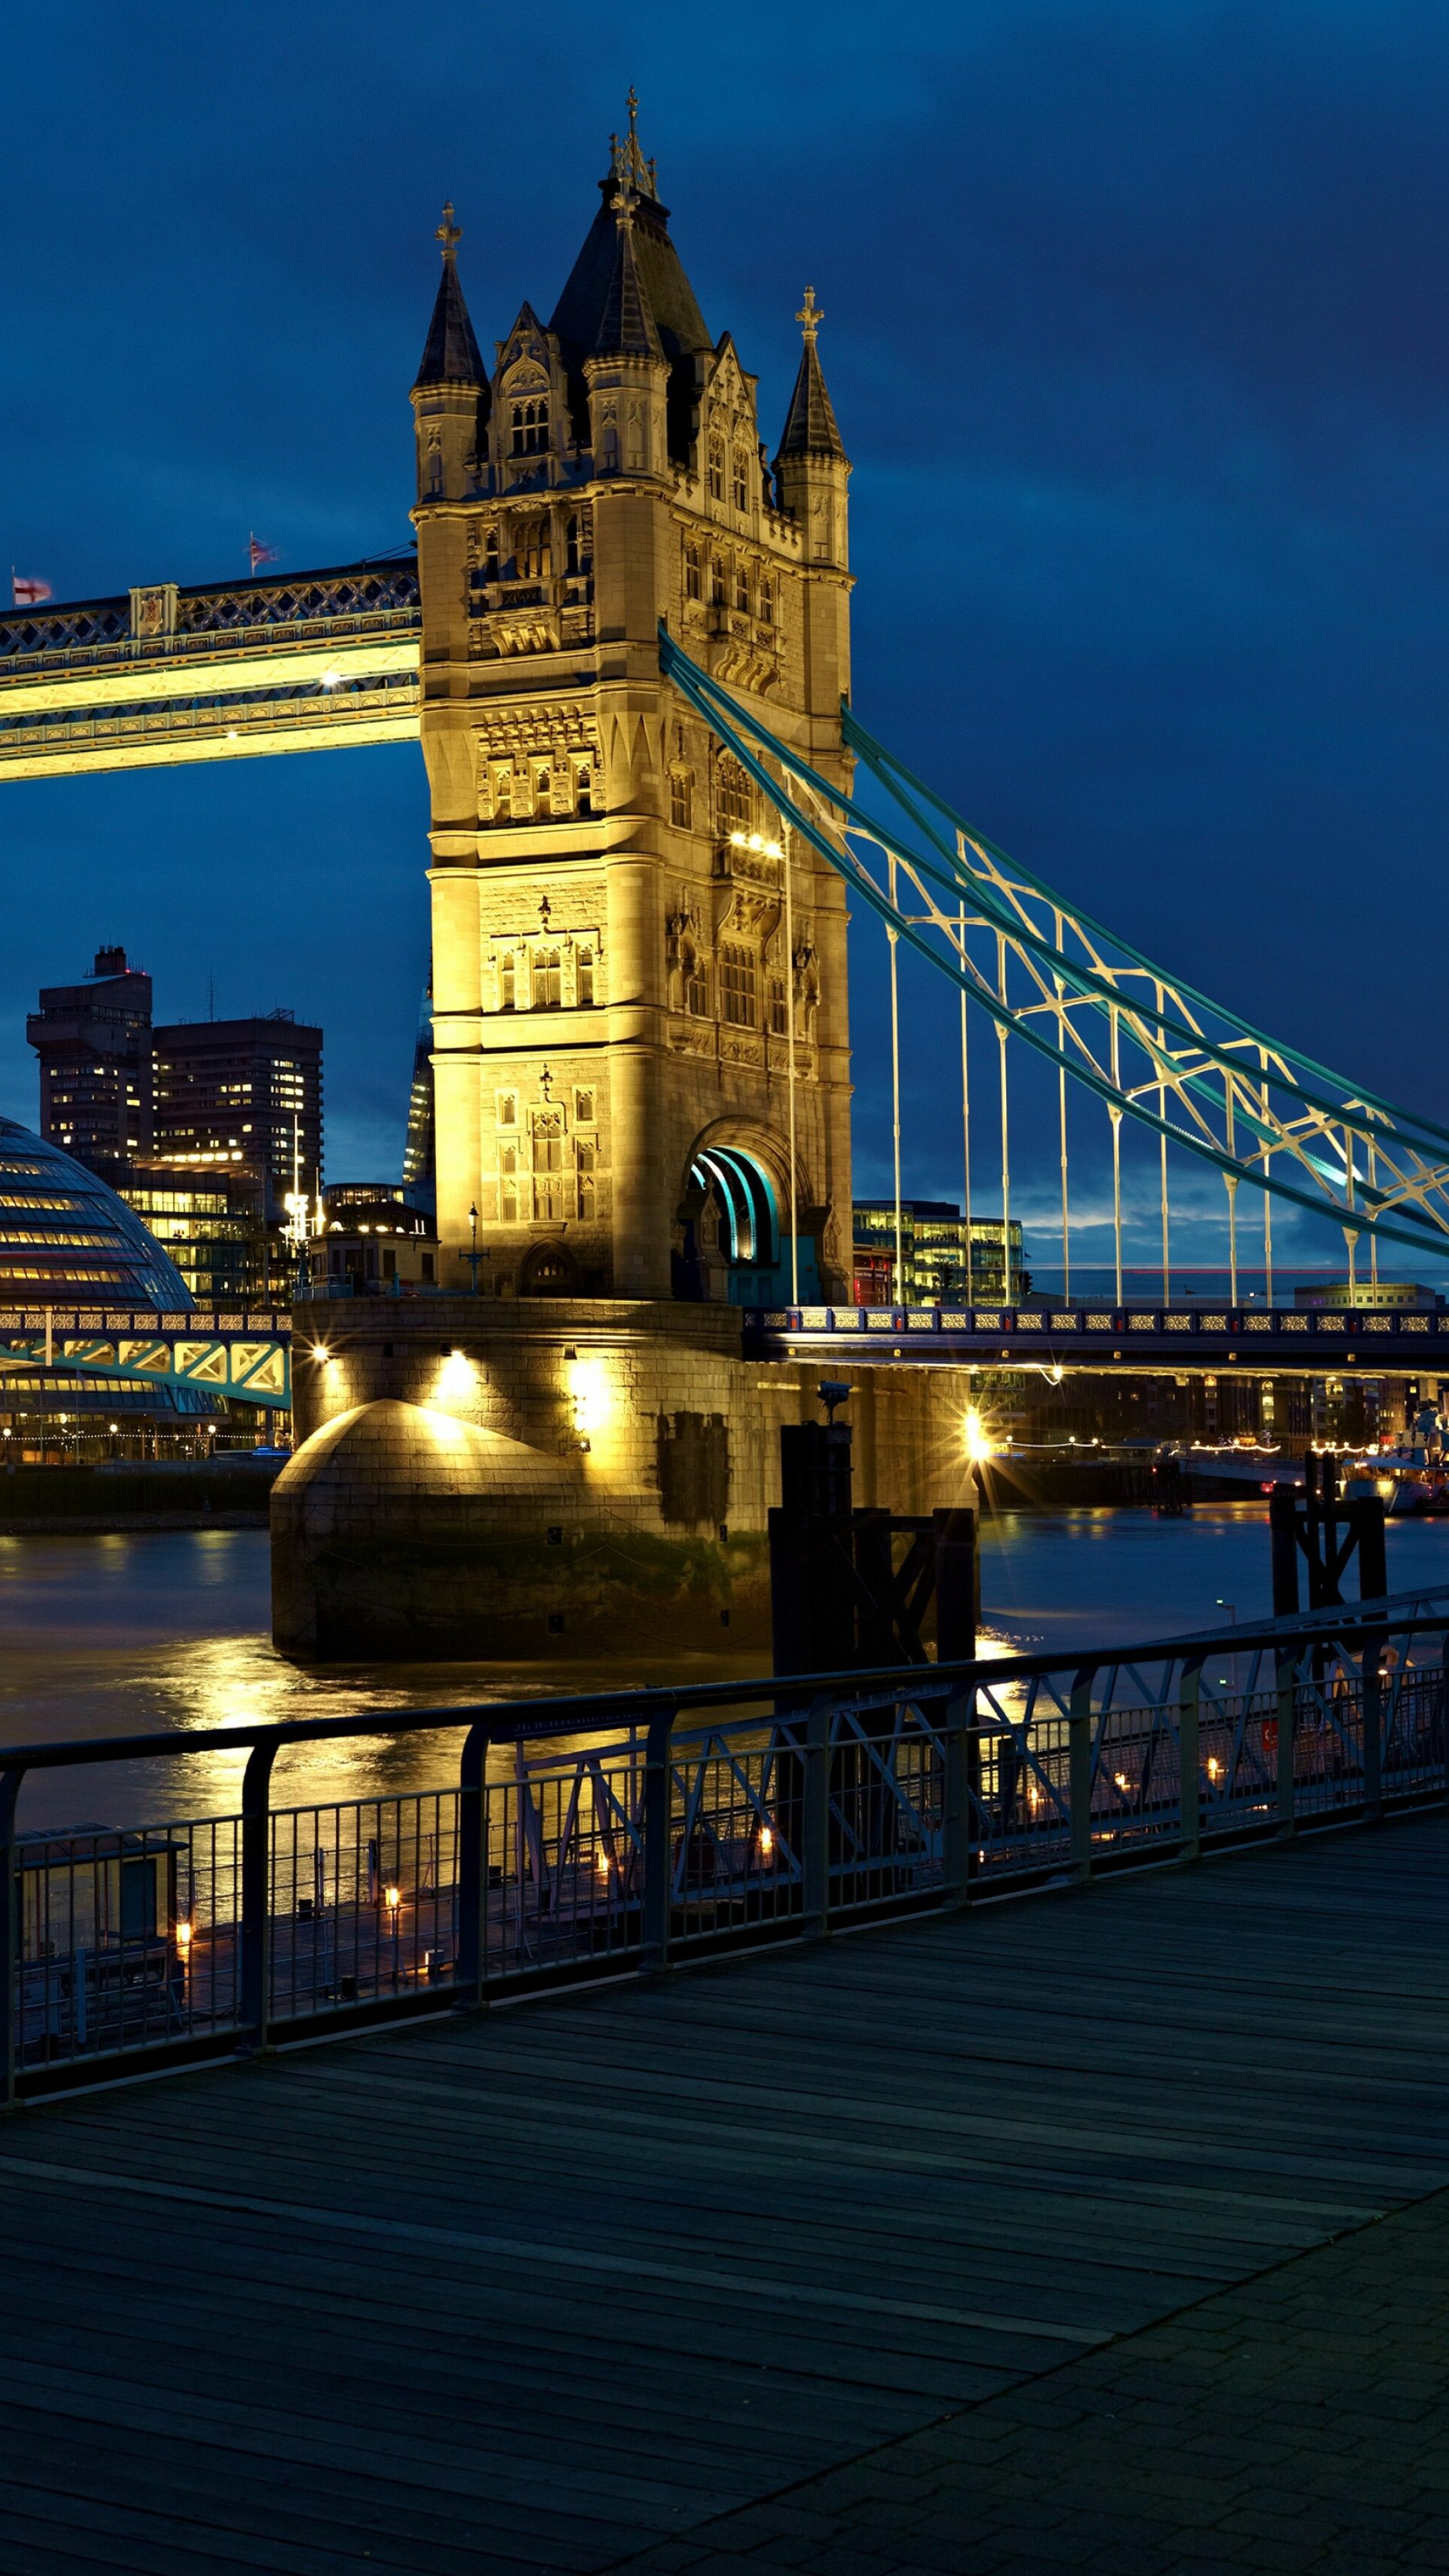 Tower Bridge: It crosses the River Thames close to the Tower of London. 2160x3840 4K Wallpaper.